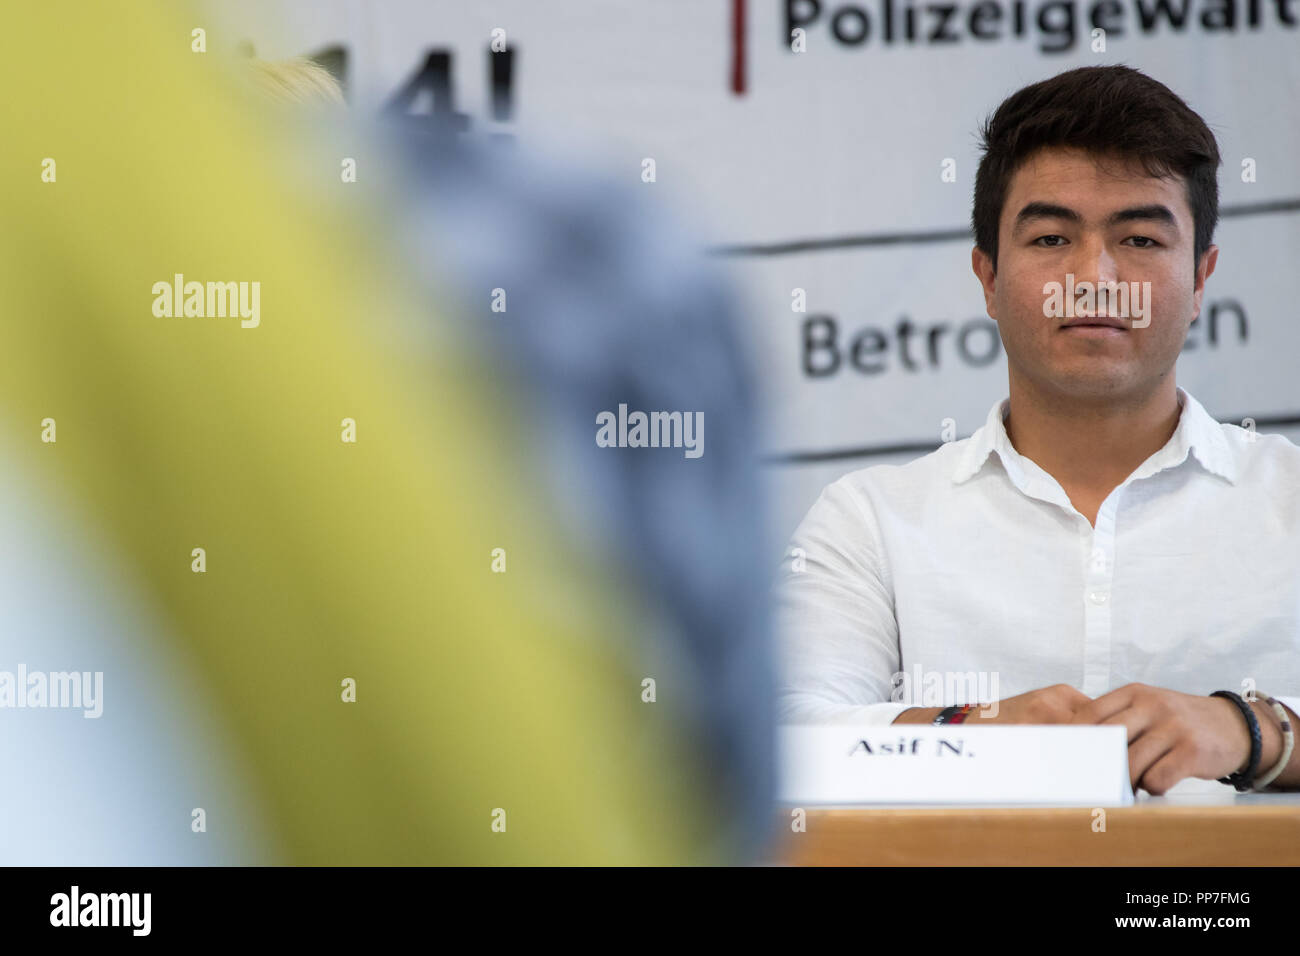 Nuernberg, Bavaria. 24th Sep, 2018. Asif N., a refugee from Afghanistan, sits behind his name tag during a press conference during an upcoming trial after a tumultuous deportation attempt. On May 31, 2017, the then 20-year-old was to be taken into deportation custody from a Nuremberg vocational school. The deployment had attracted attention and criticism nationwide. Credit: Daniel Karmann/dpa/Alamy Live News Stock Photo